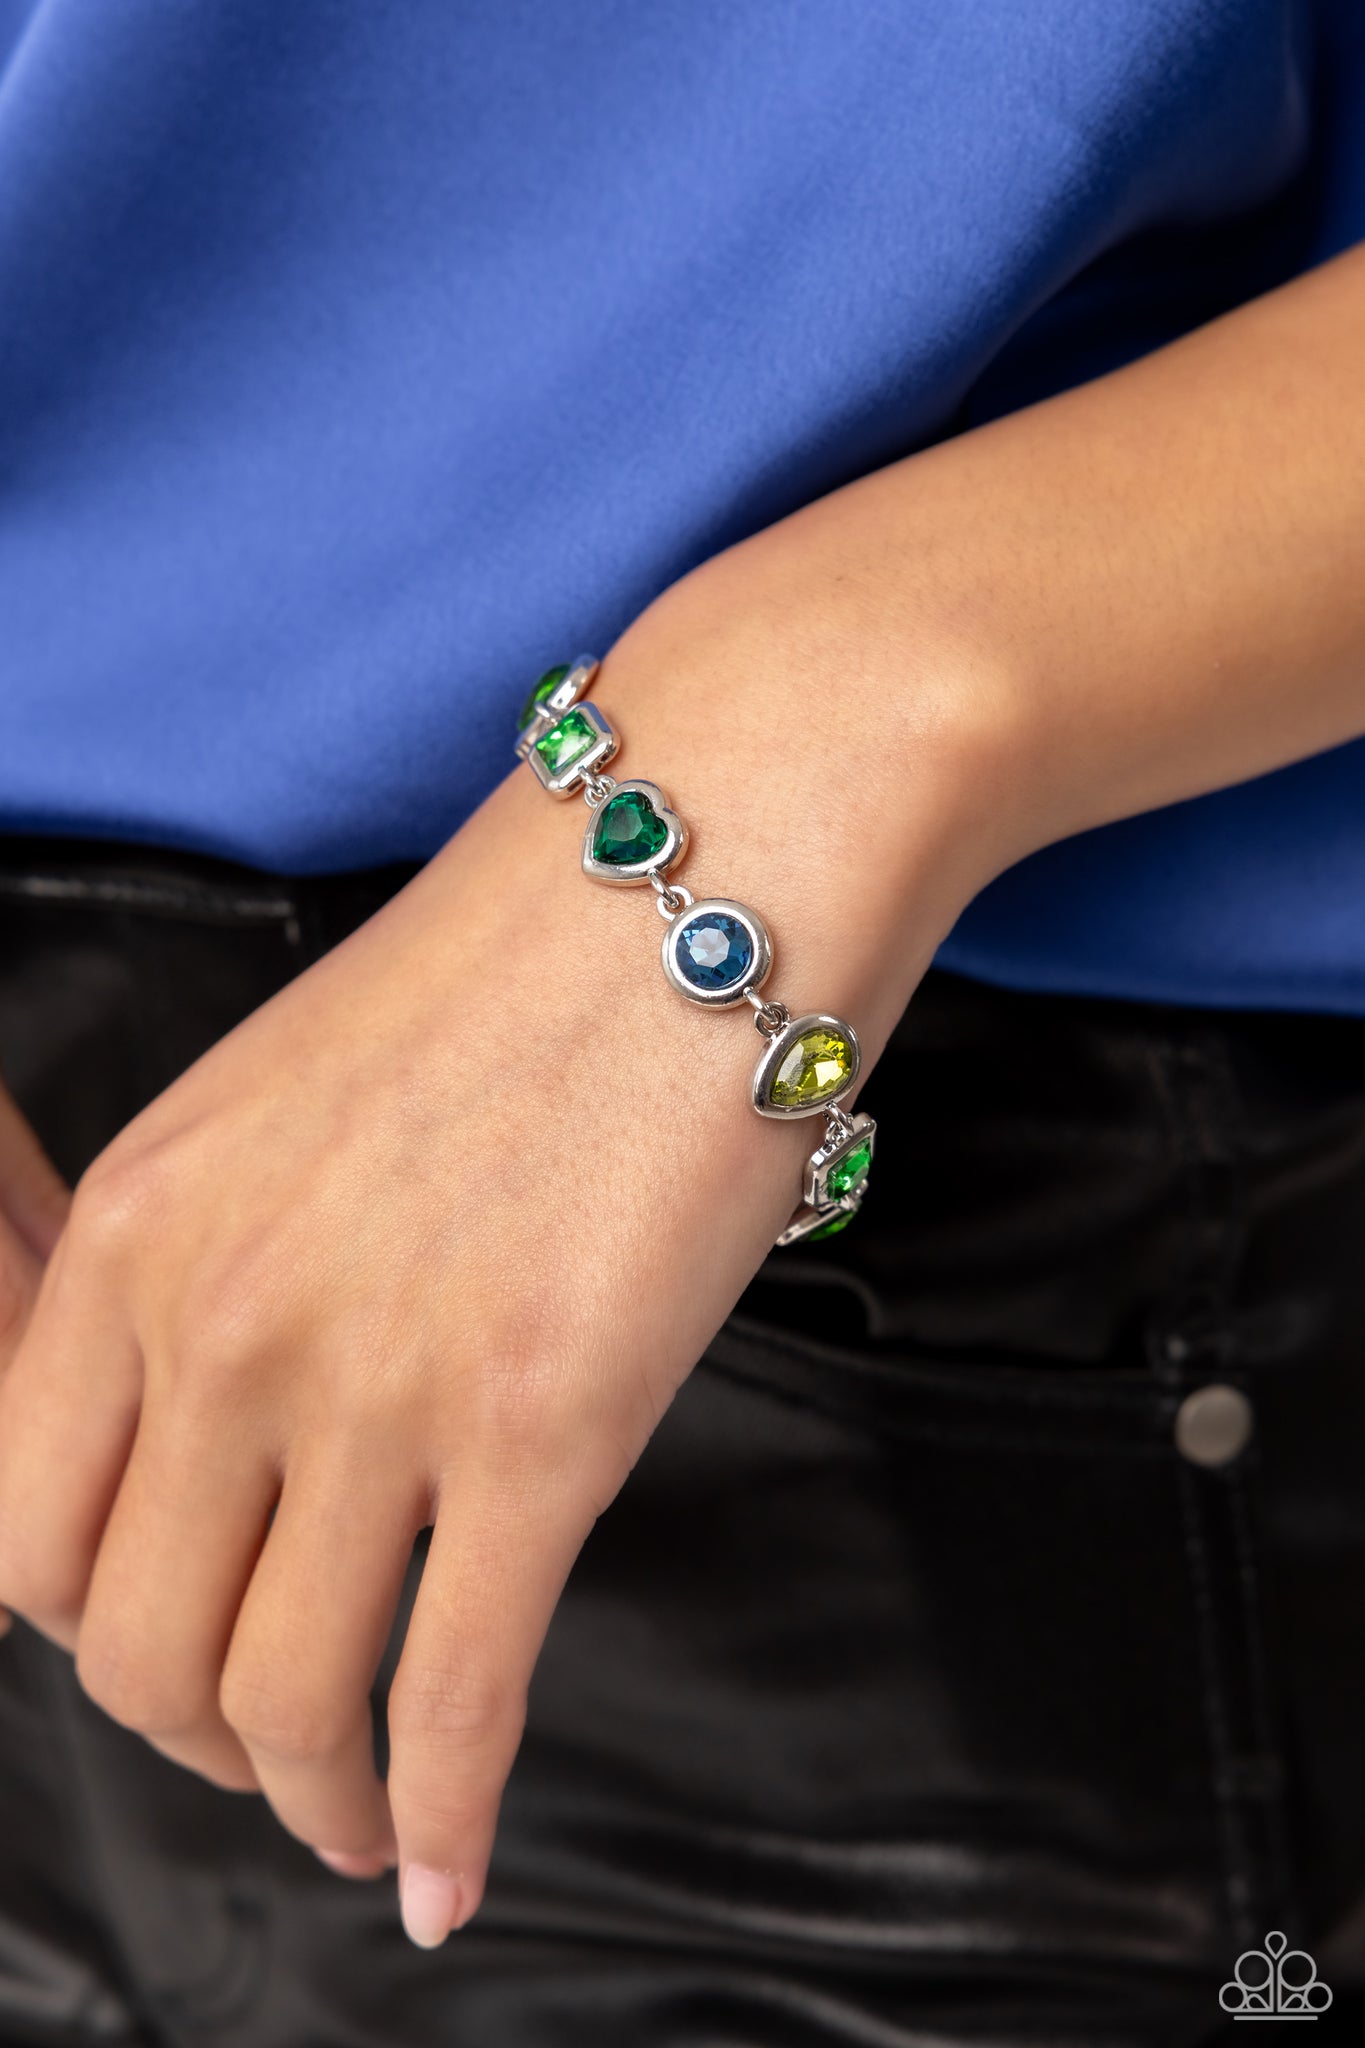 Actively Abstract Bracelet (Multi, Green, Purple)